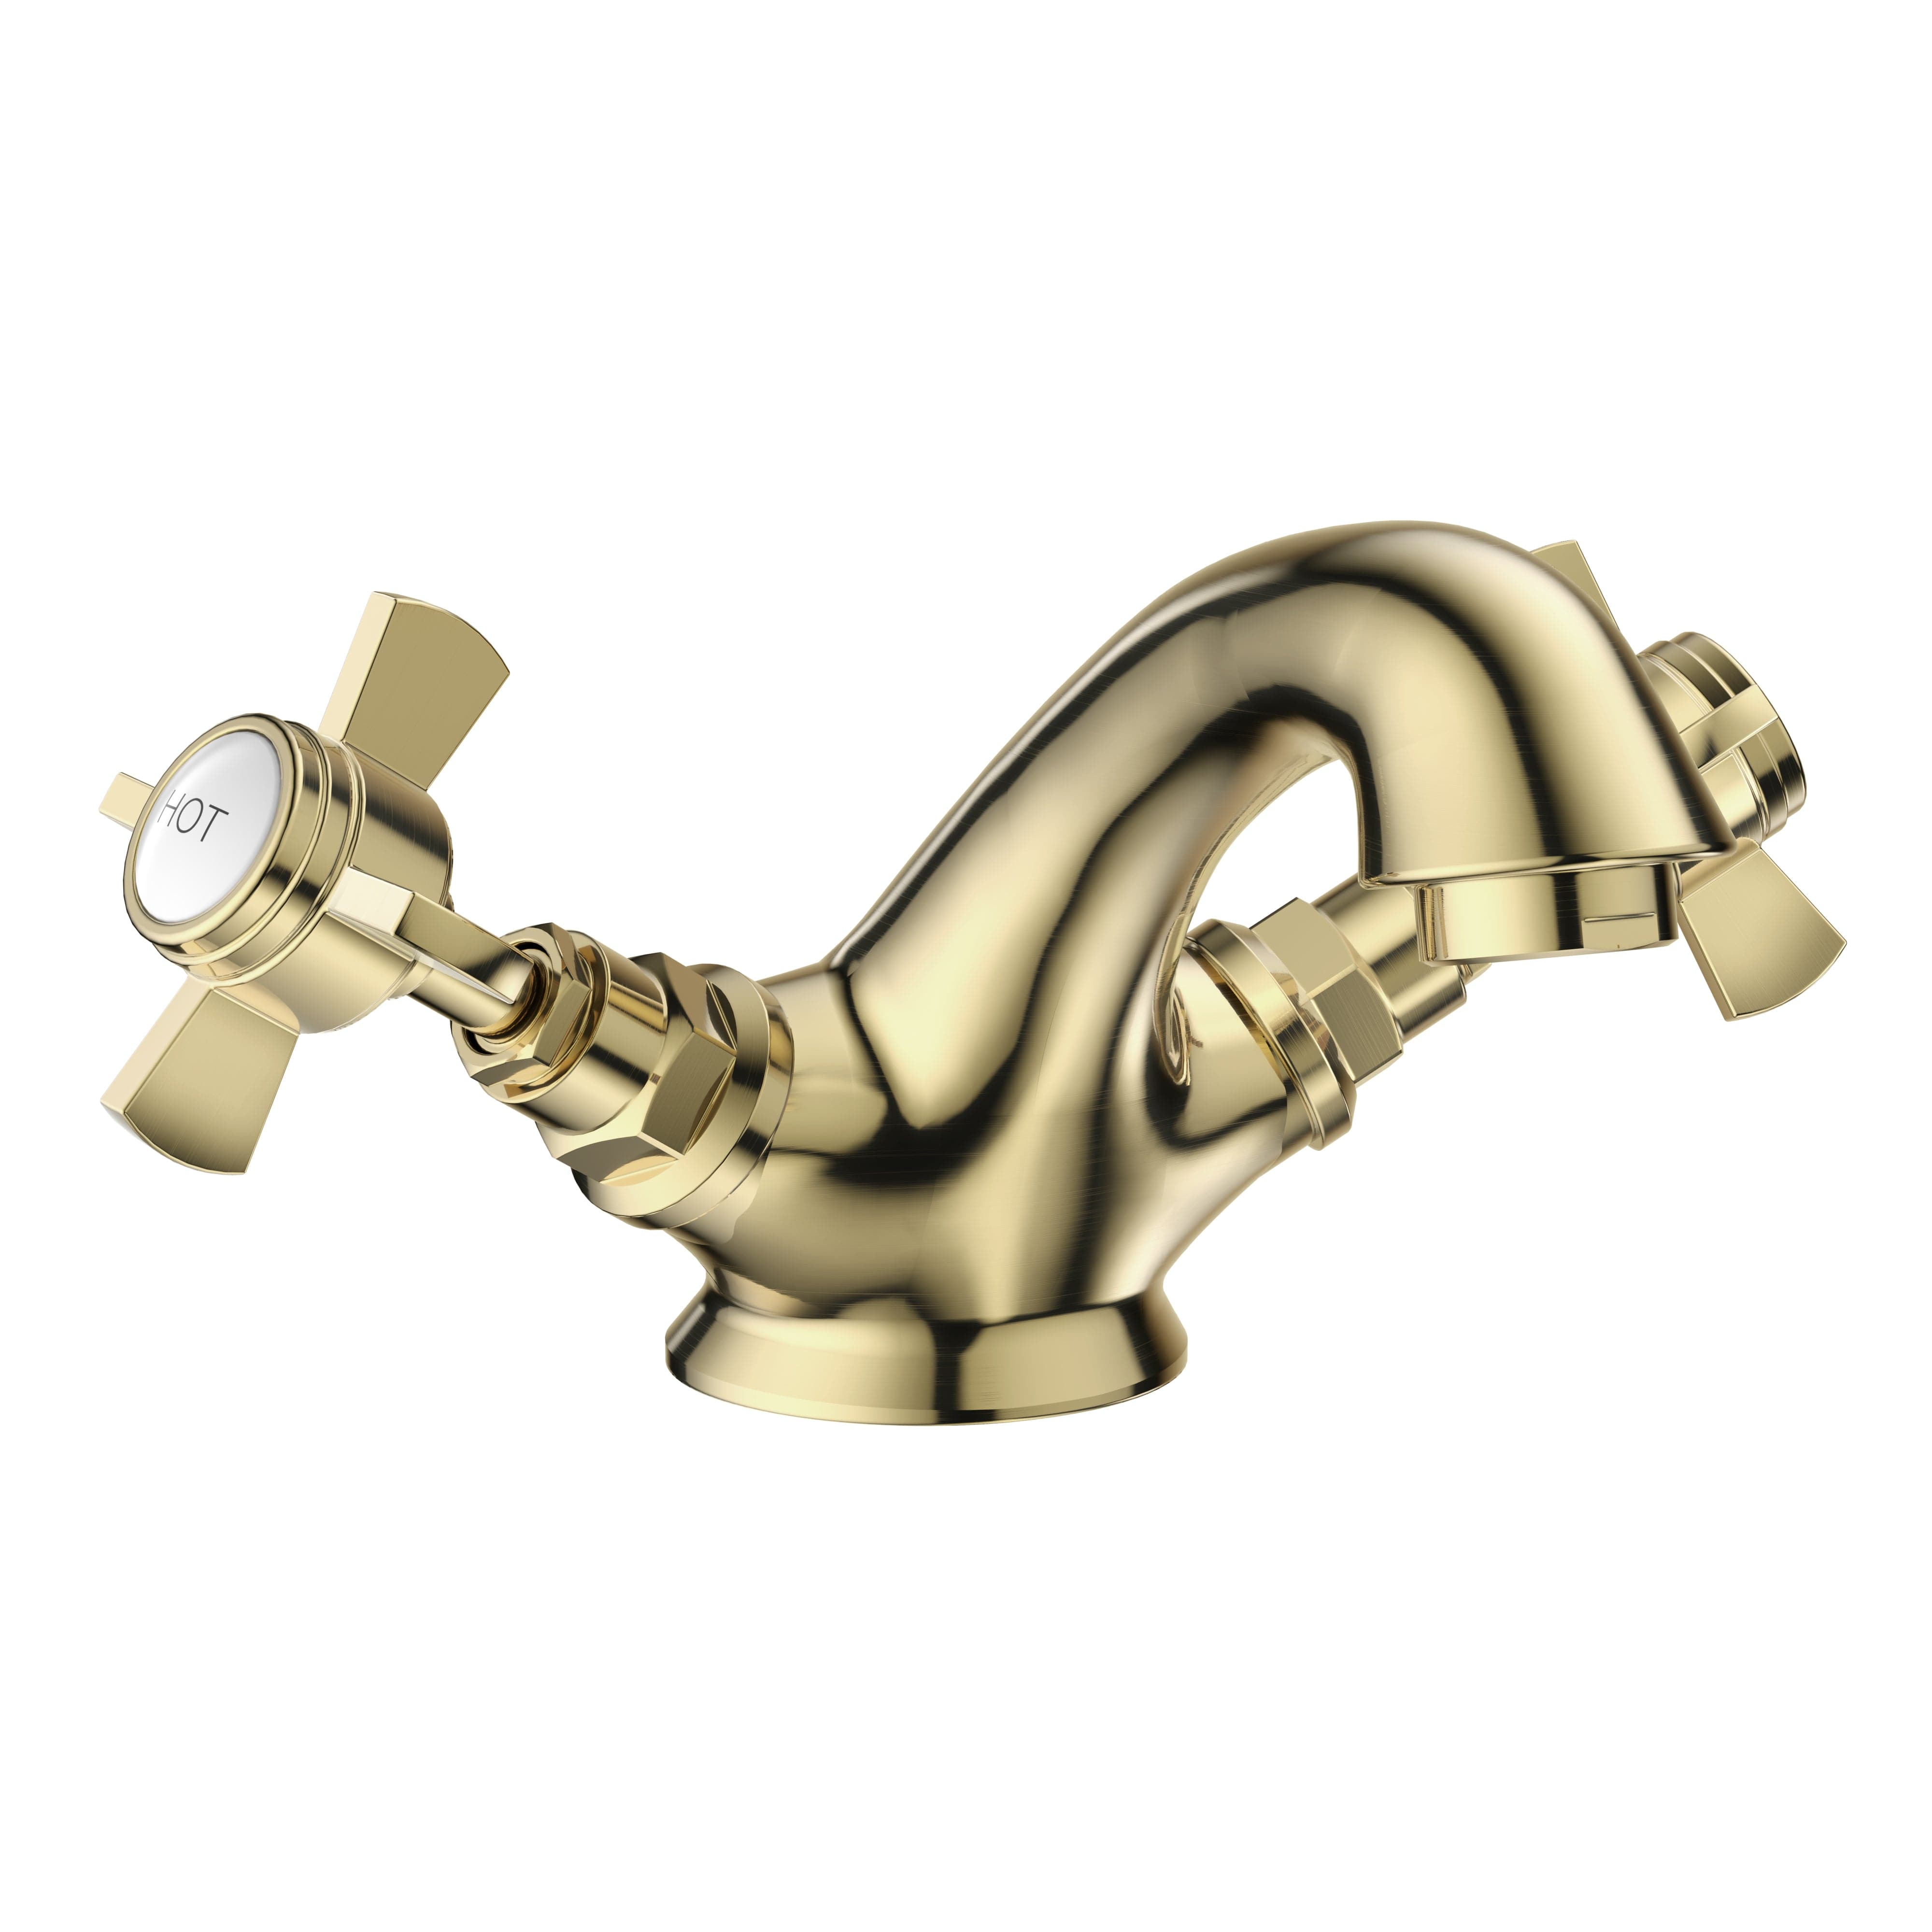 Regency Traditional Mono Basin Mixer Tap with Waste - Brushed Brass